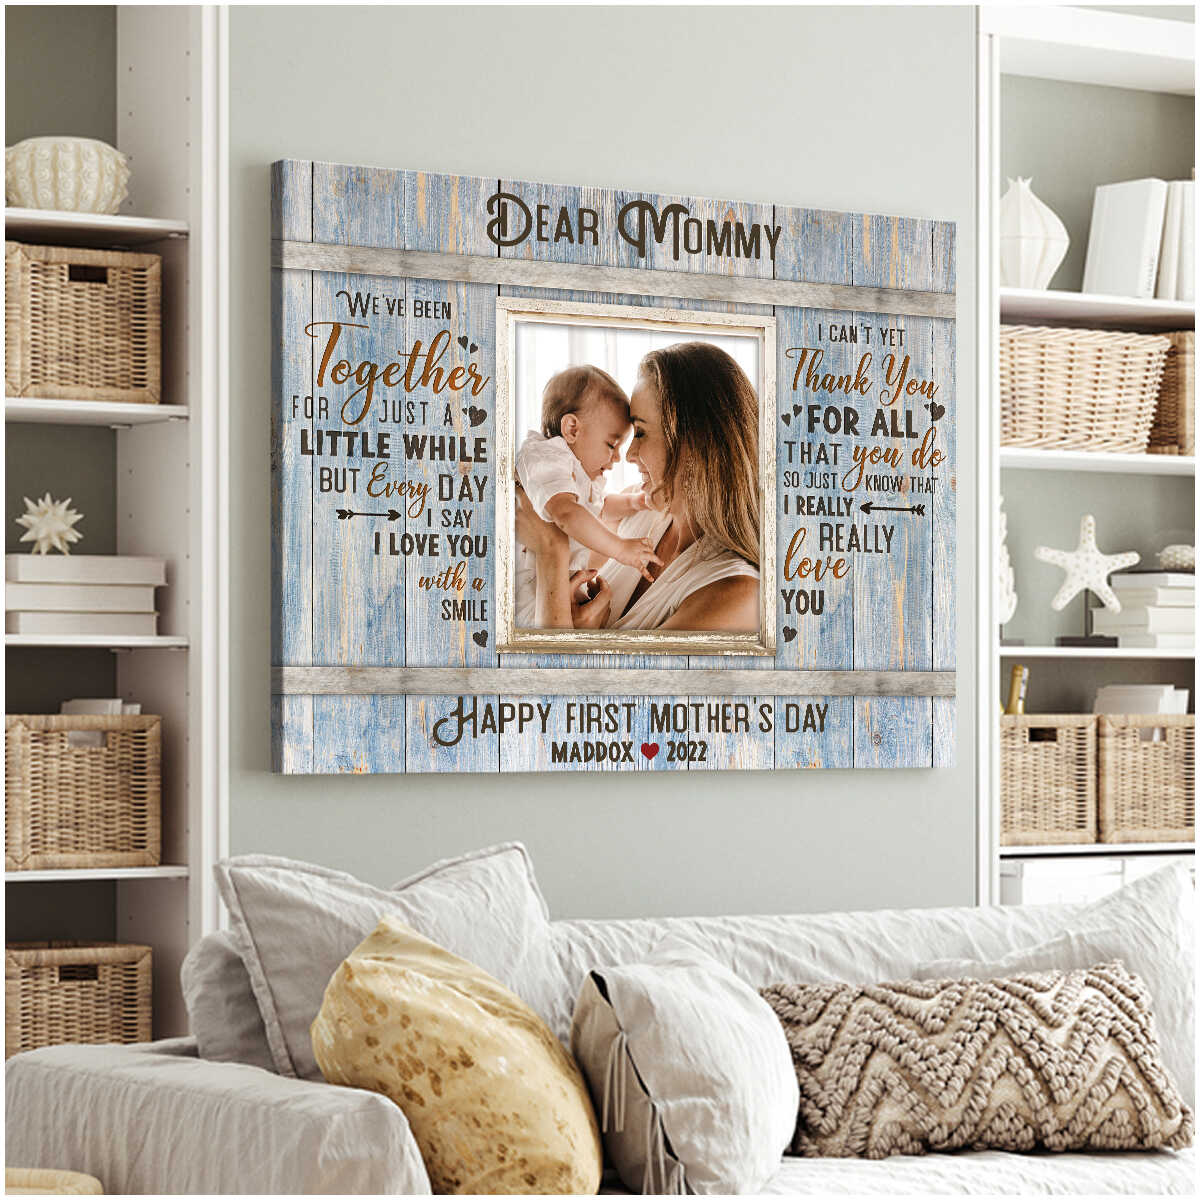 Mommy I Can't Wait To Meet You Custom Ultrasound Canvas, Personalized Gift  For Mom To Be, First Time Mom Gift From The Bump - Best Personalized Gifts  For Everyone